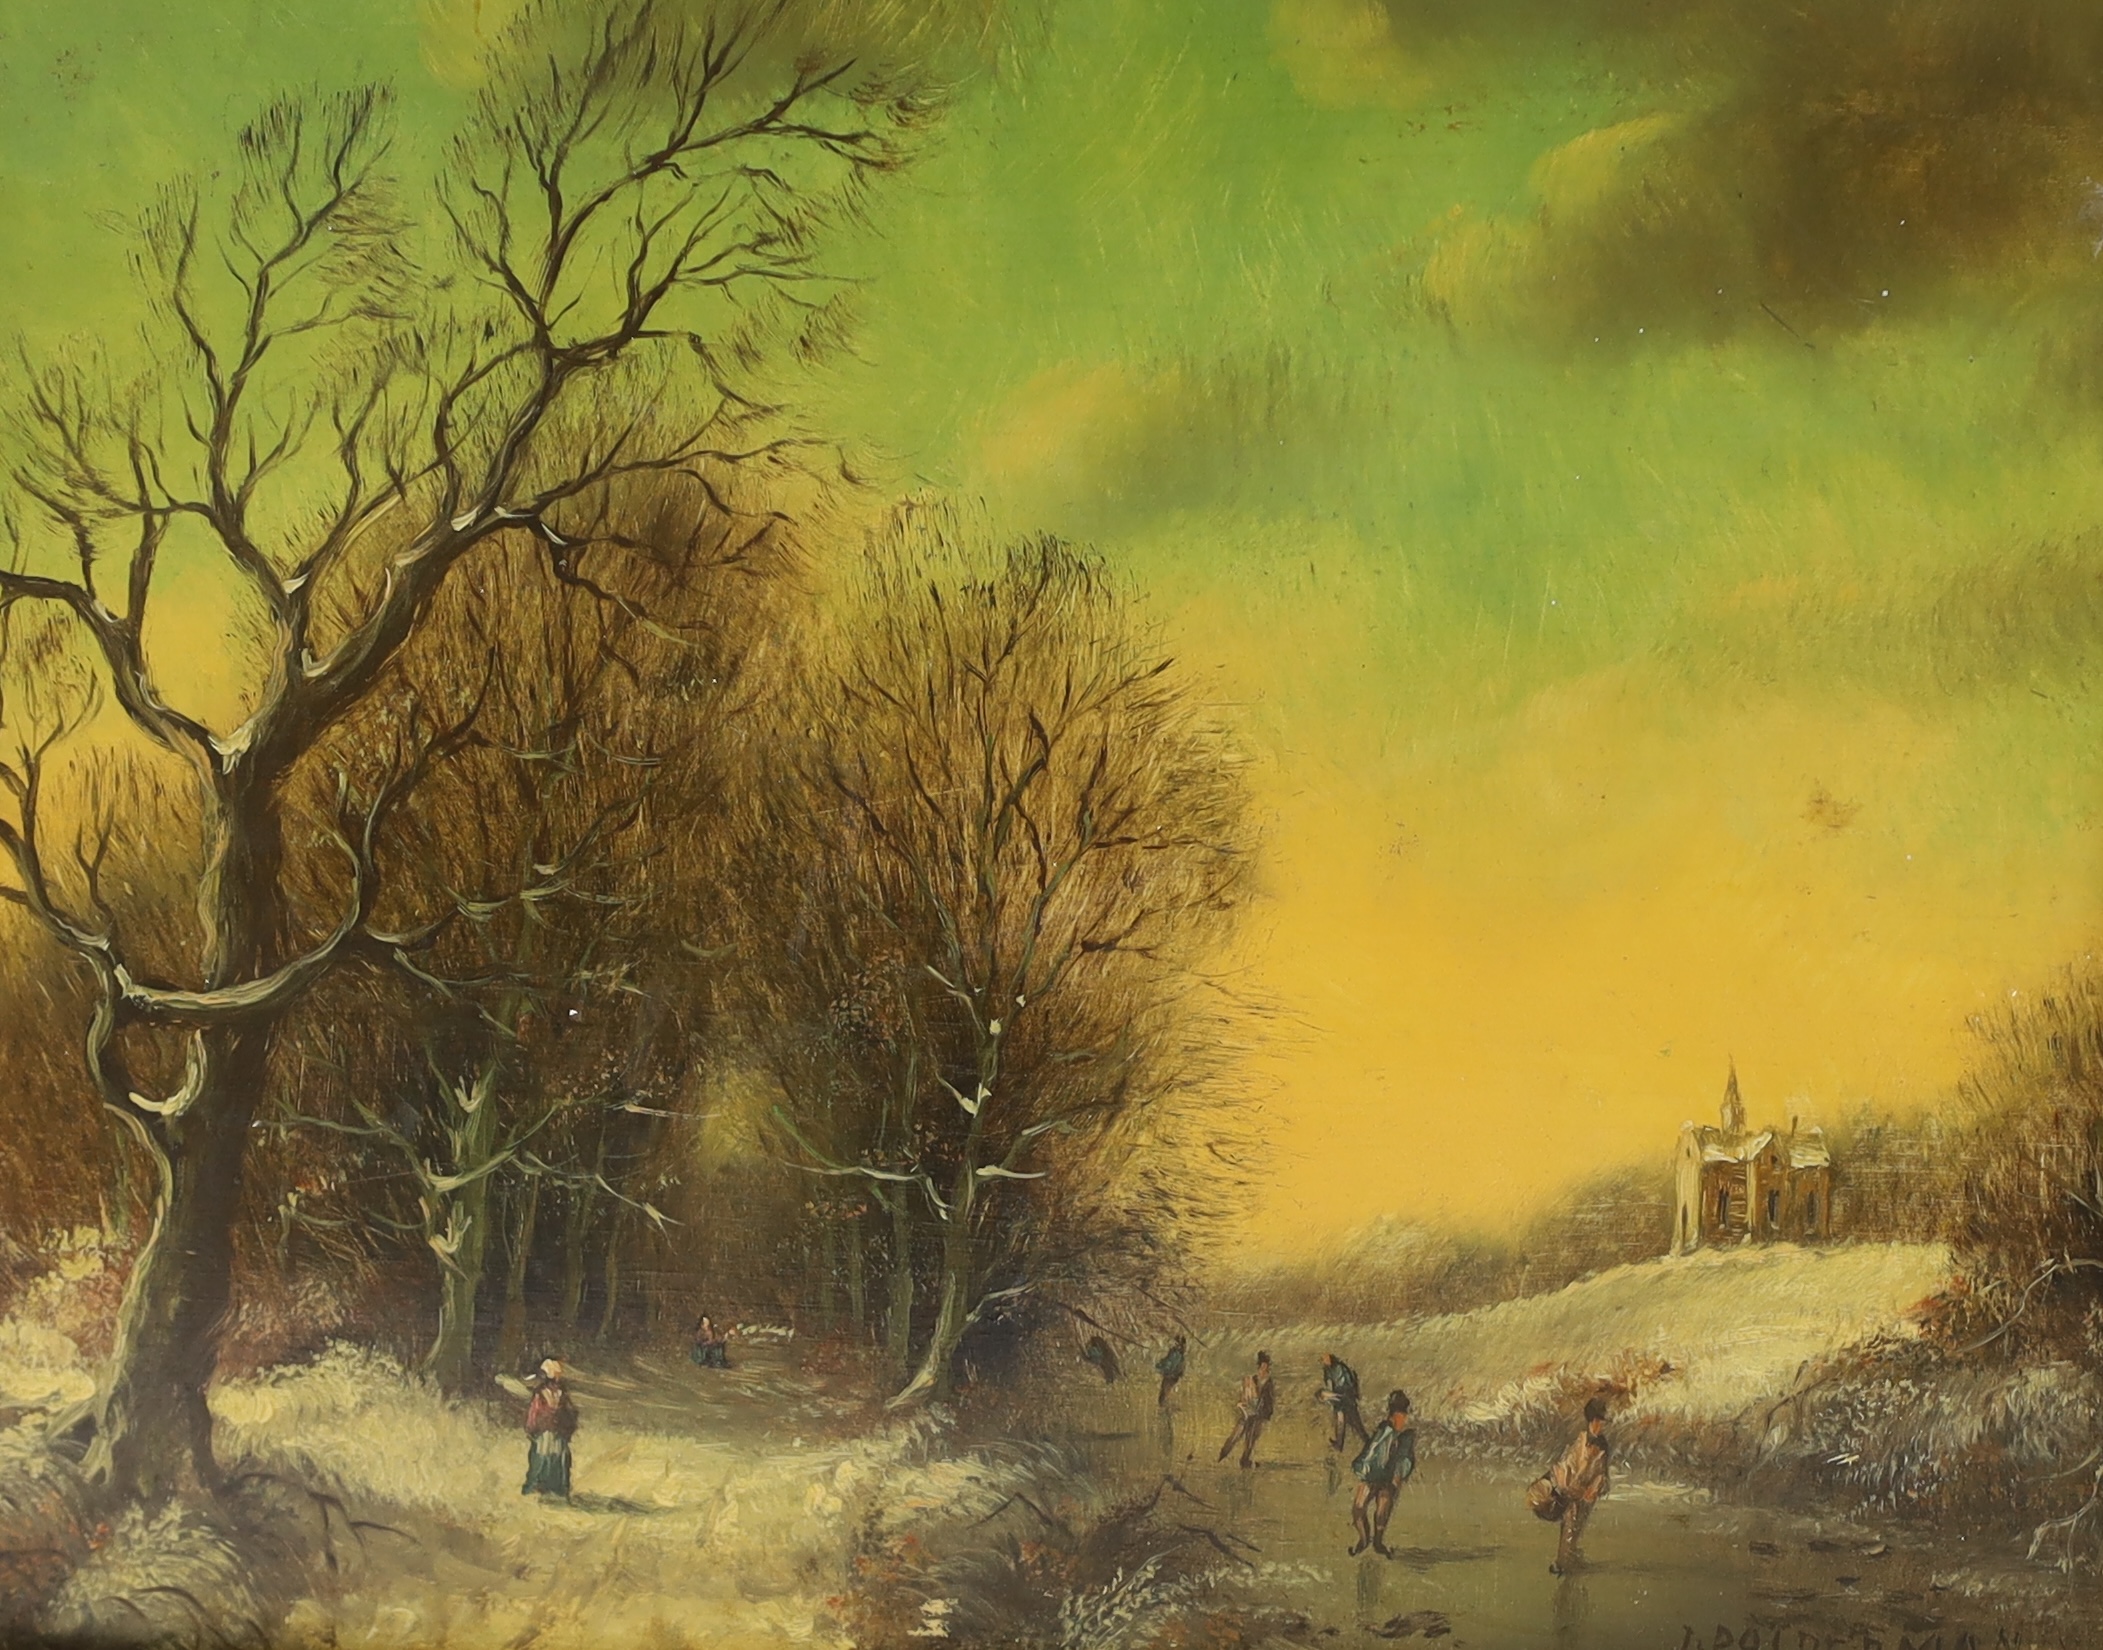 J. Polderman, oil on board, Winter landscape with skaters, signed, 19 x 24cm. Condition - fair to good